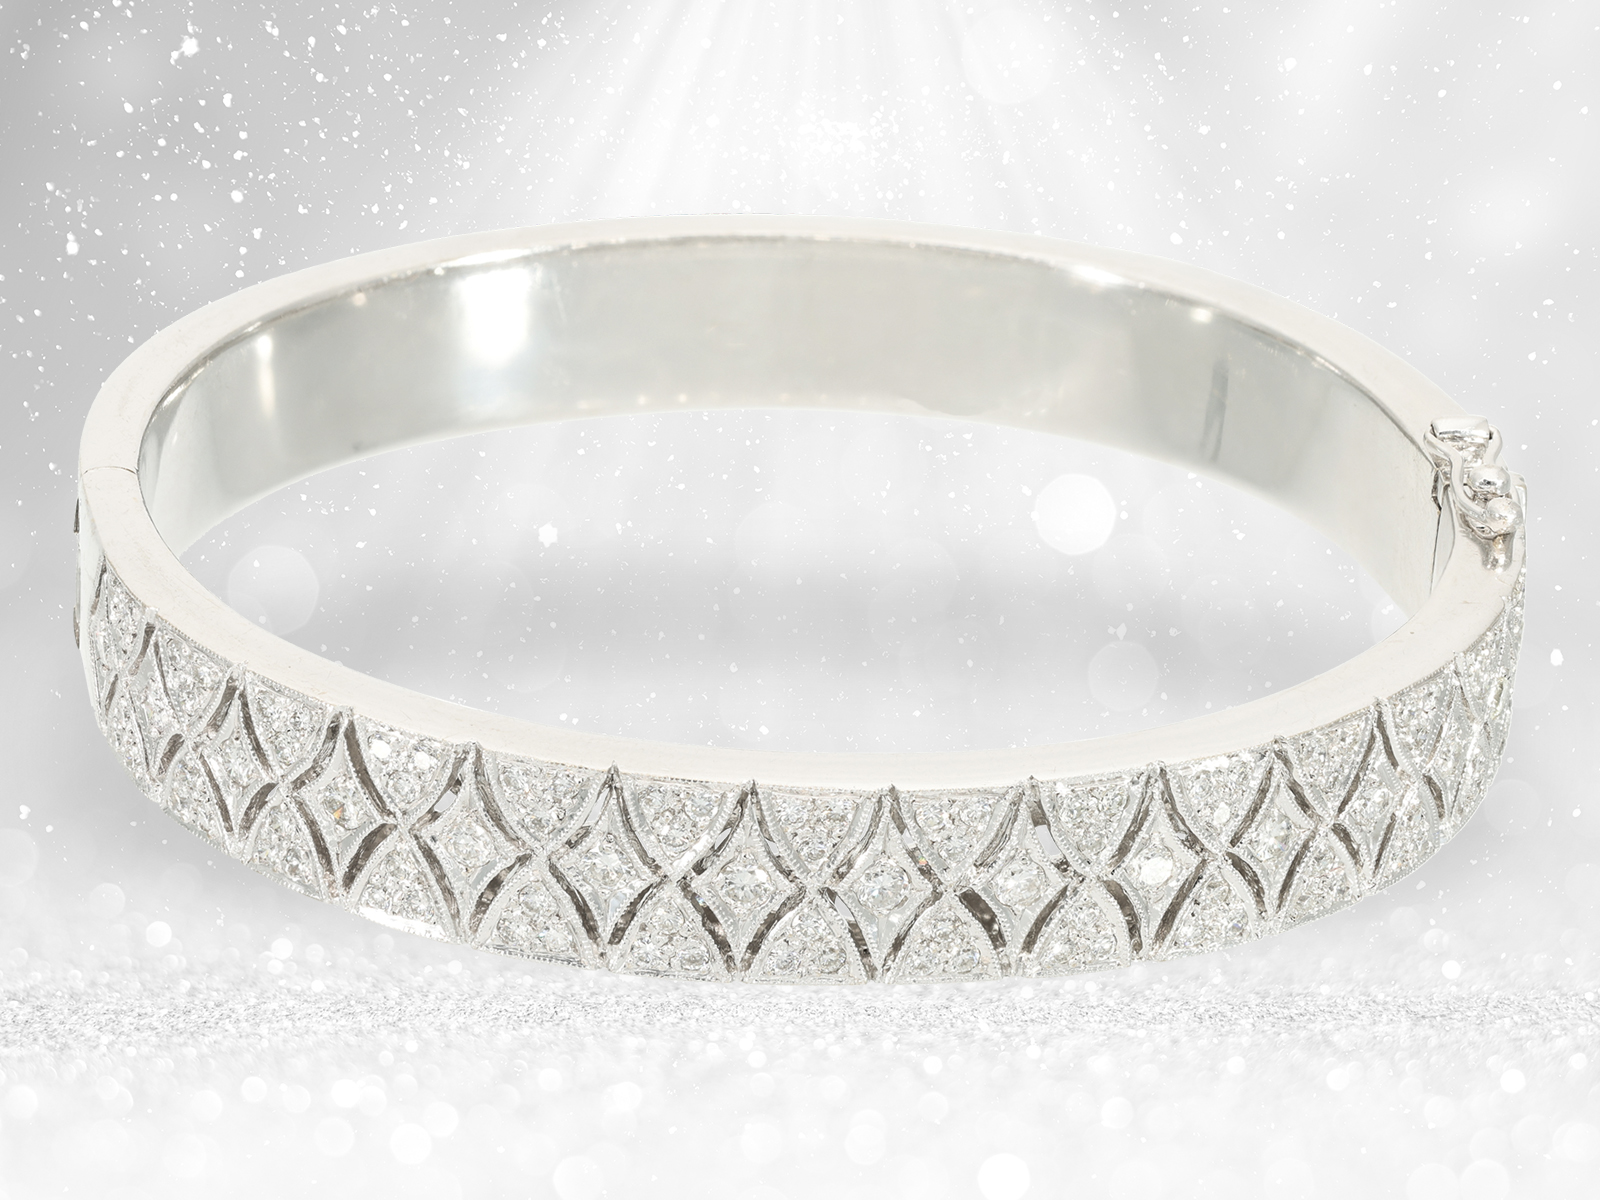 Heavy and high quality white gold bracelet with high quality brilliant-cut diamonds, approx. 1.2ct